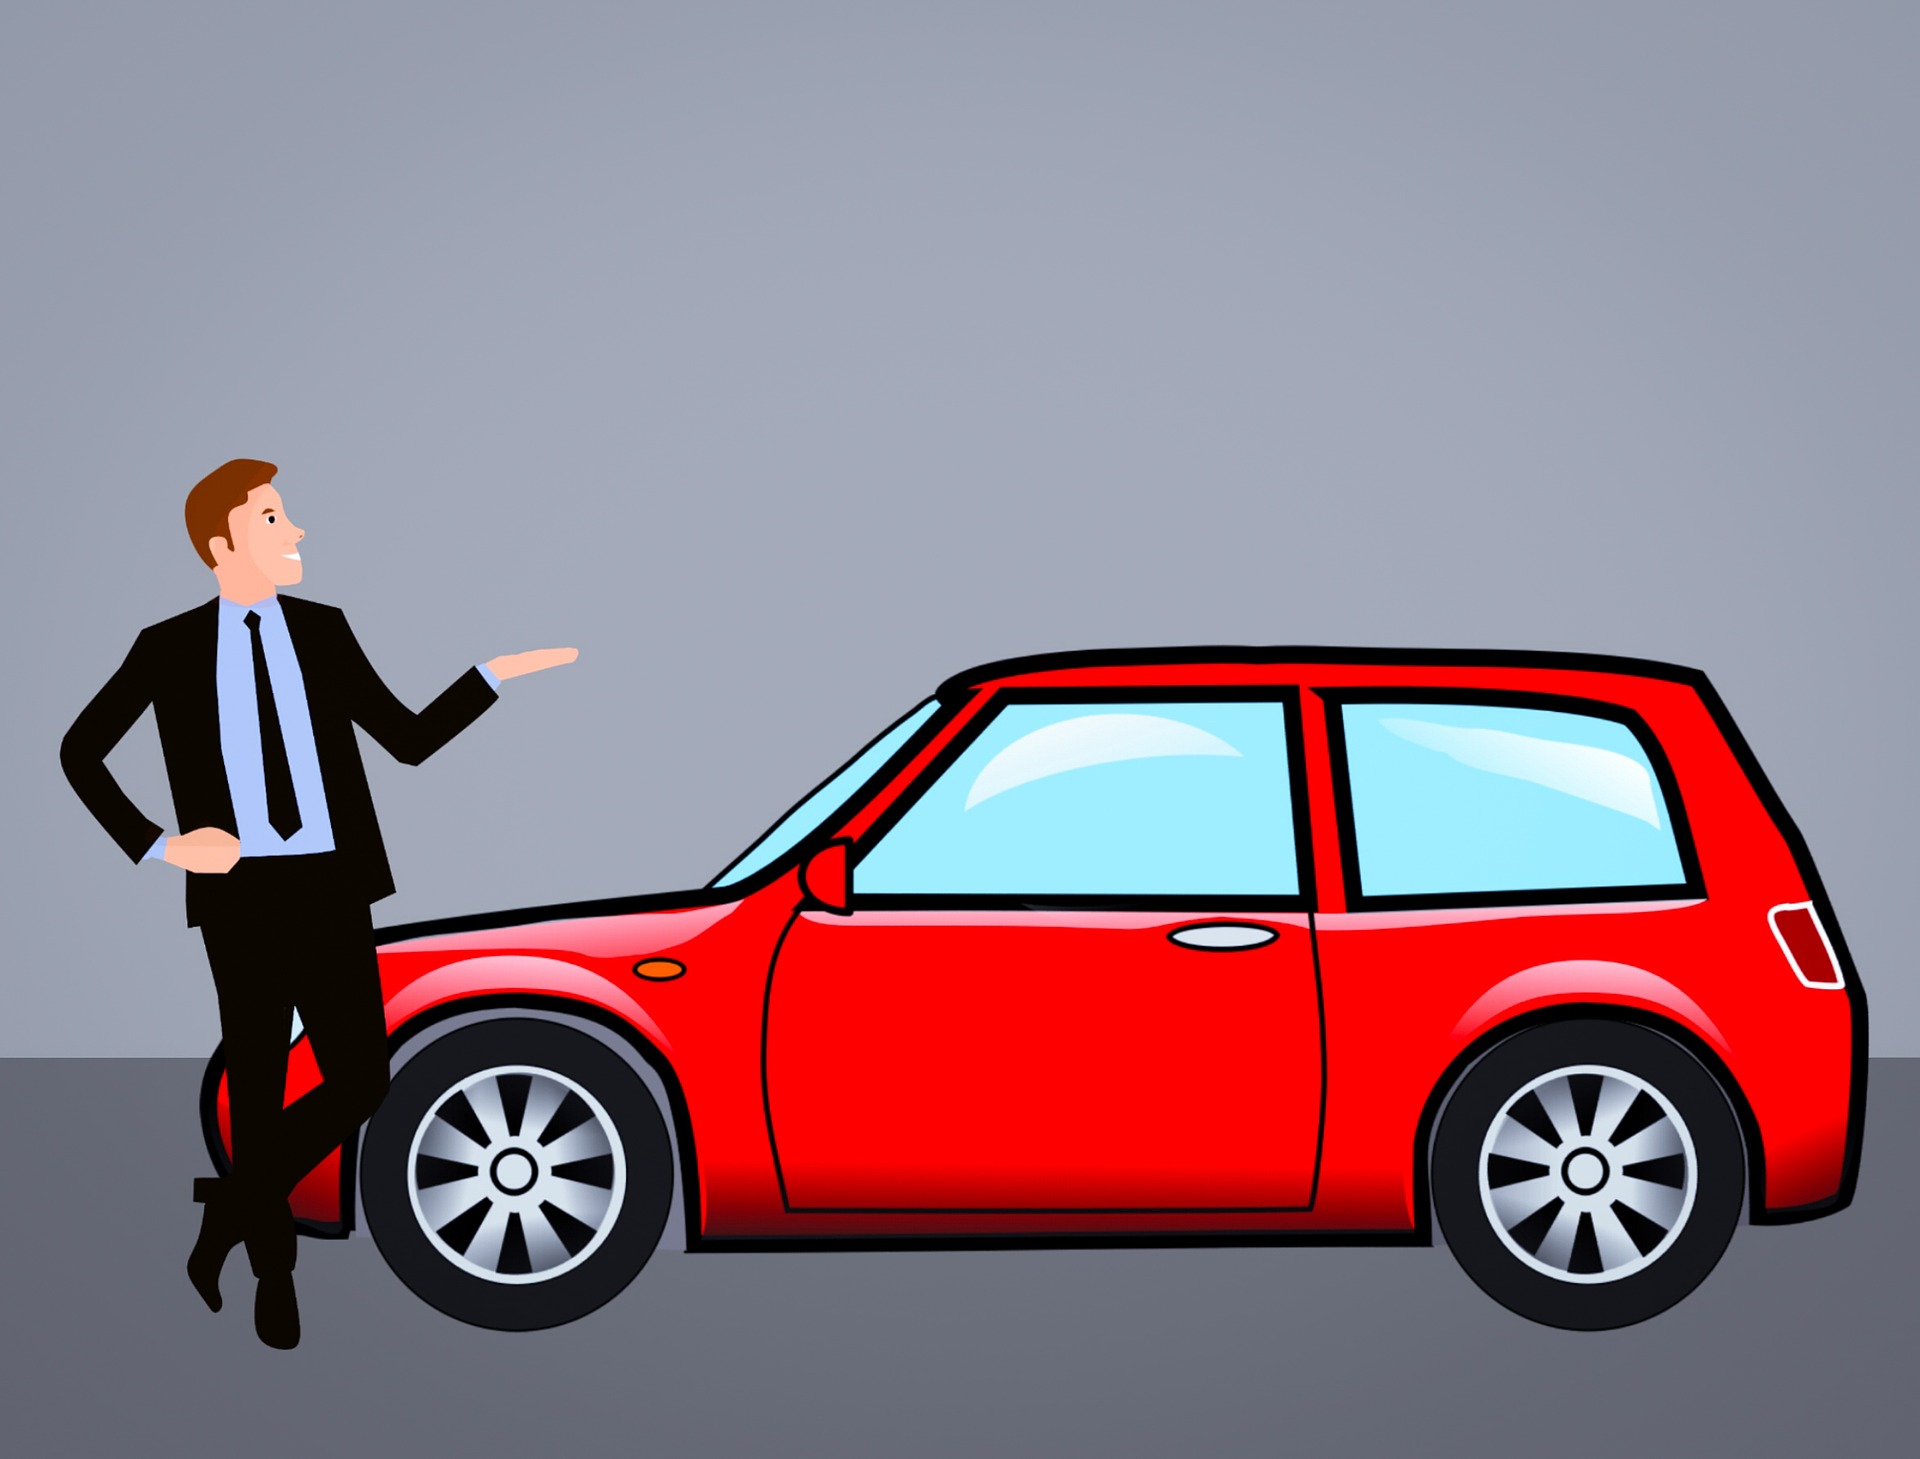 5 Tips To Make Smart Decisions When Buying A Car